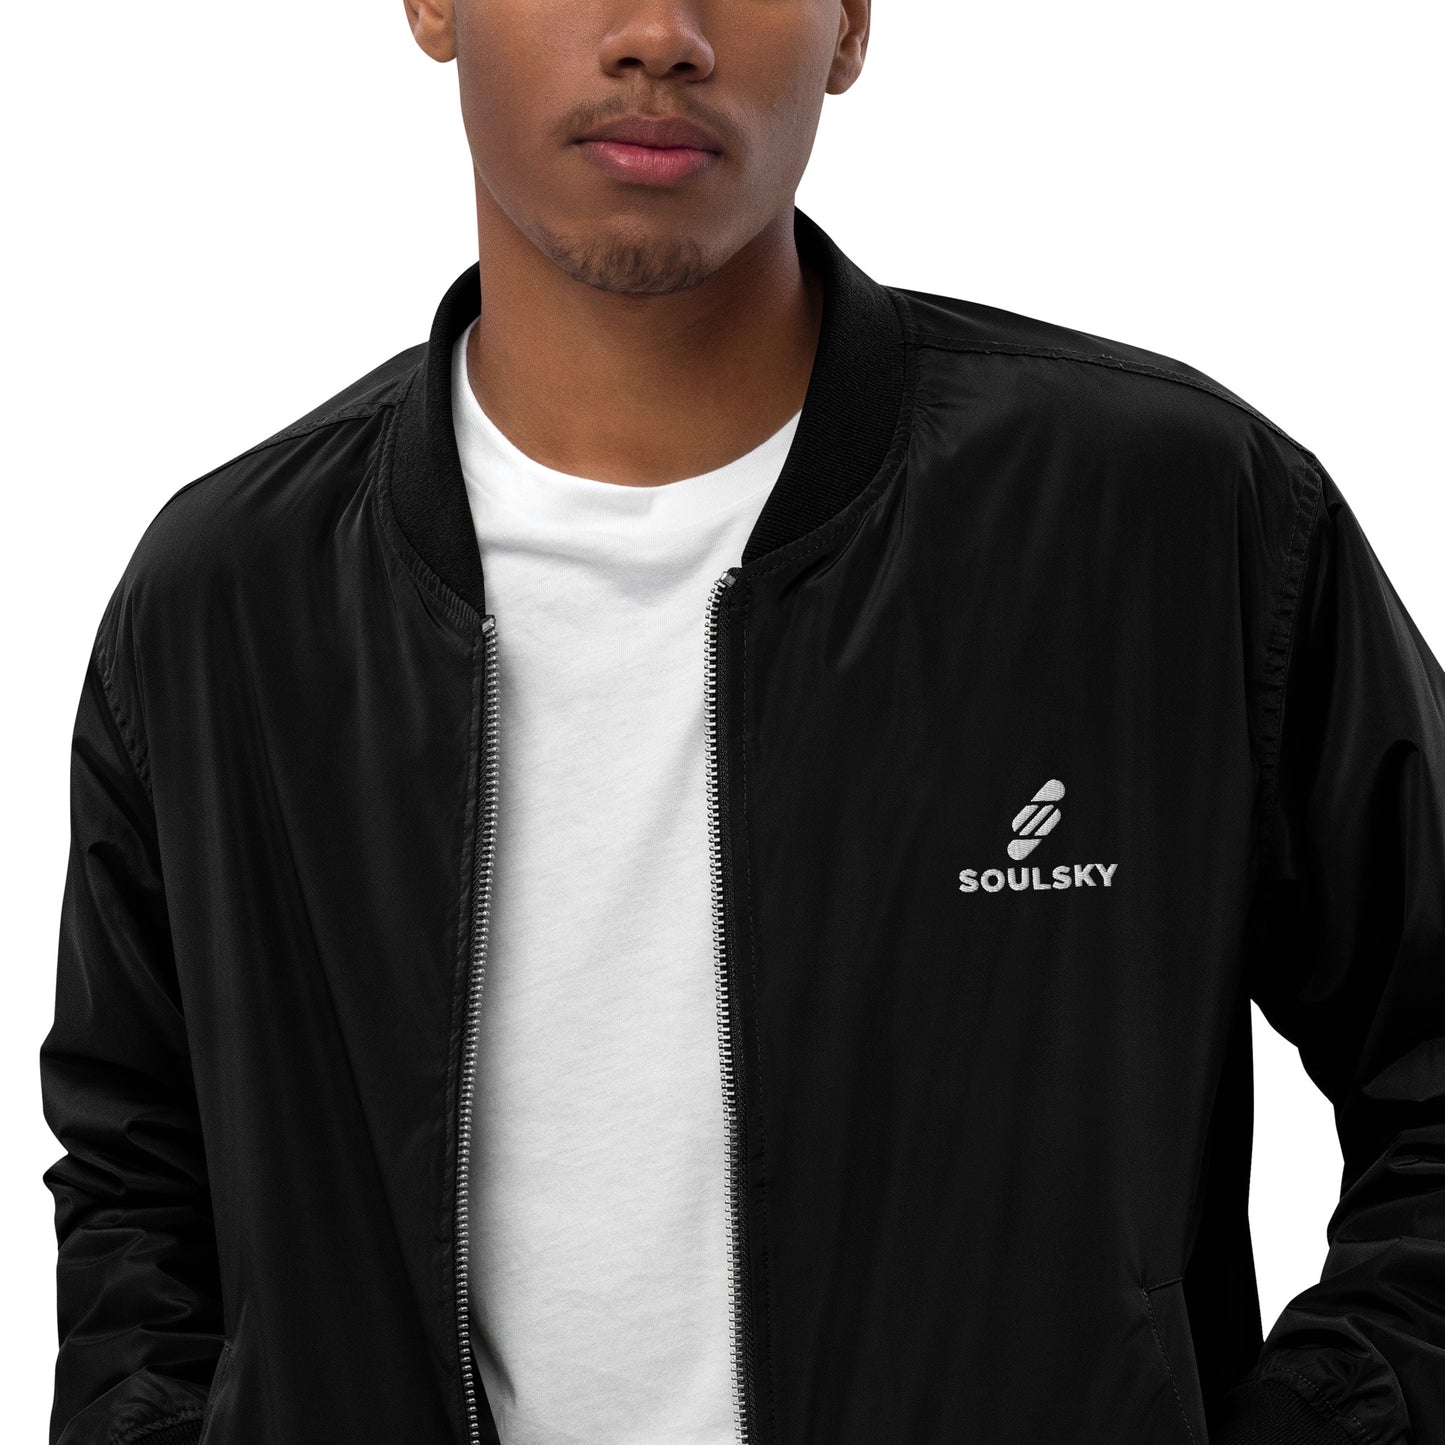 STAY THE COURSE Premium Bomber Jacket